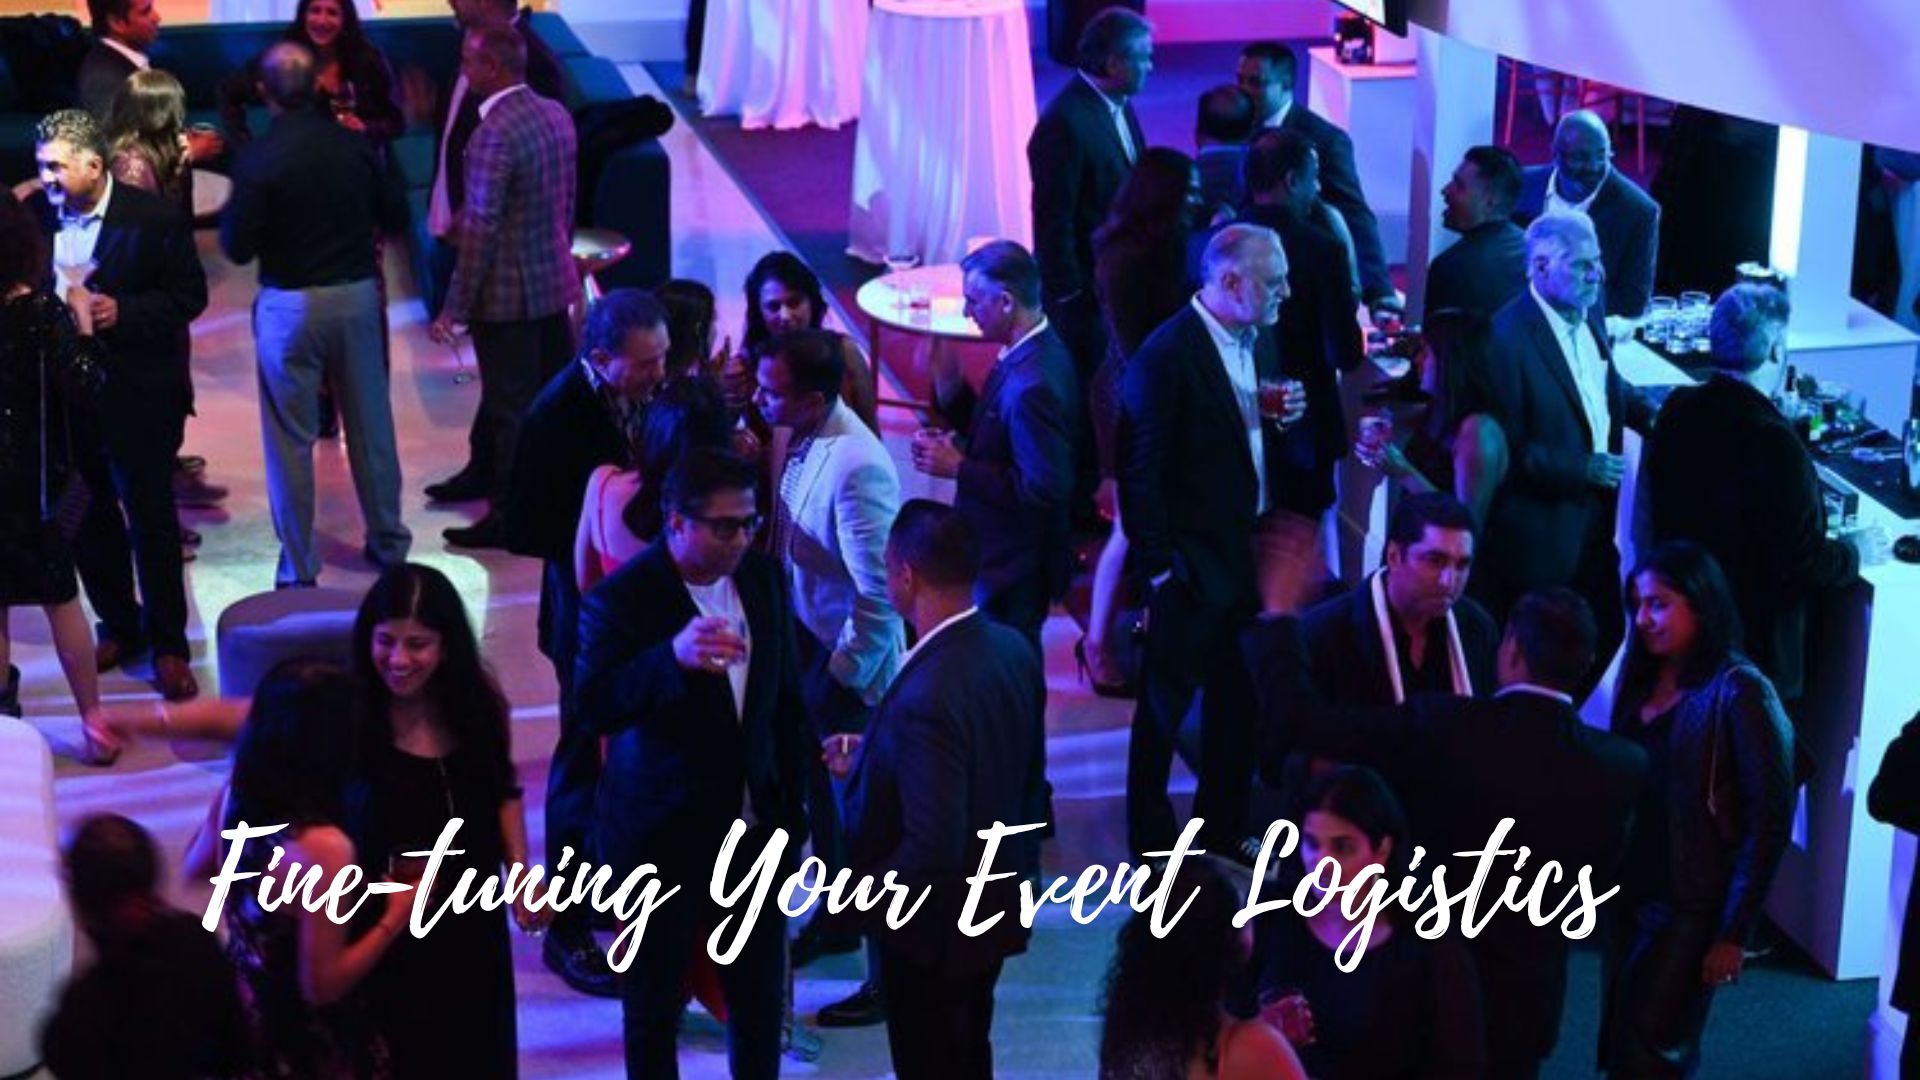 5 Key Event Logistics That Can Make or Break Your Corporate Gathering